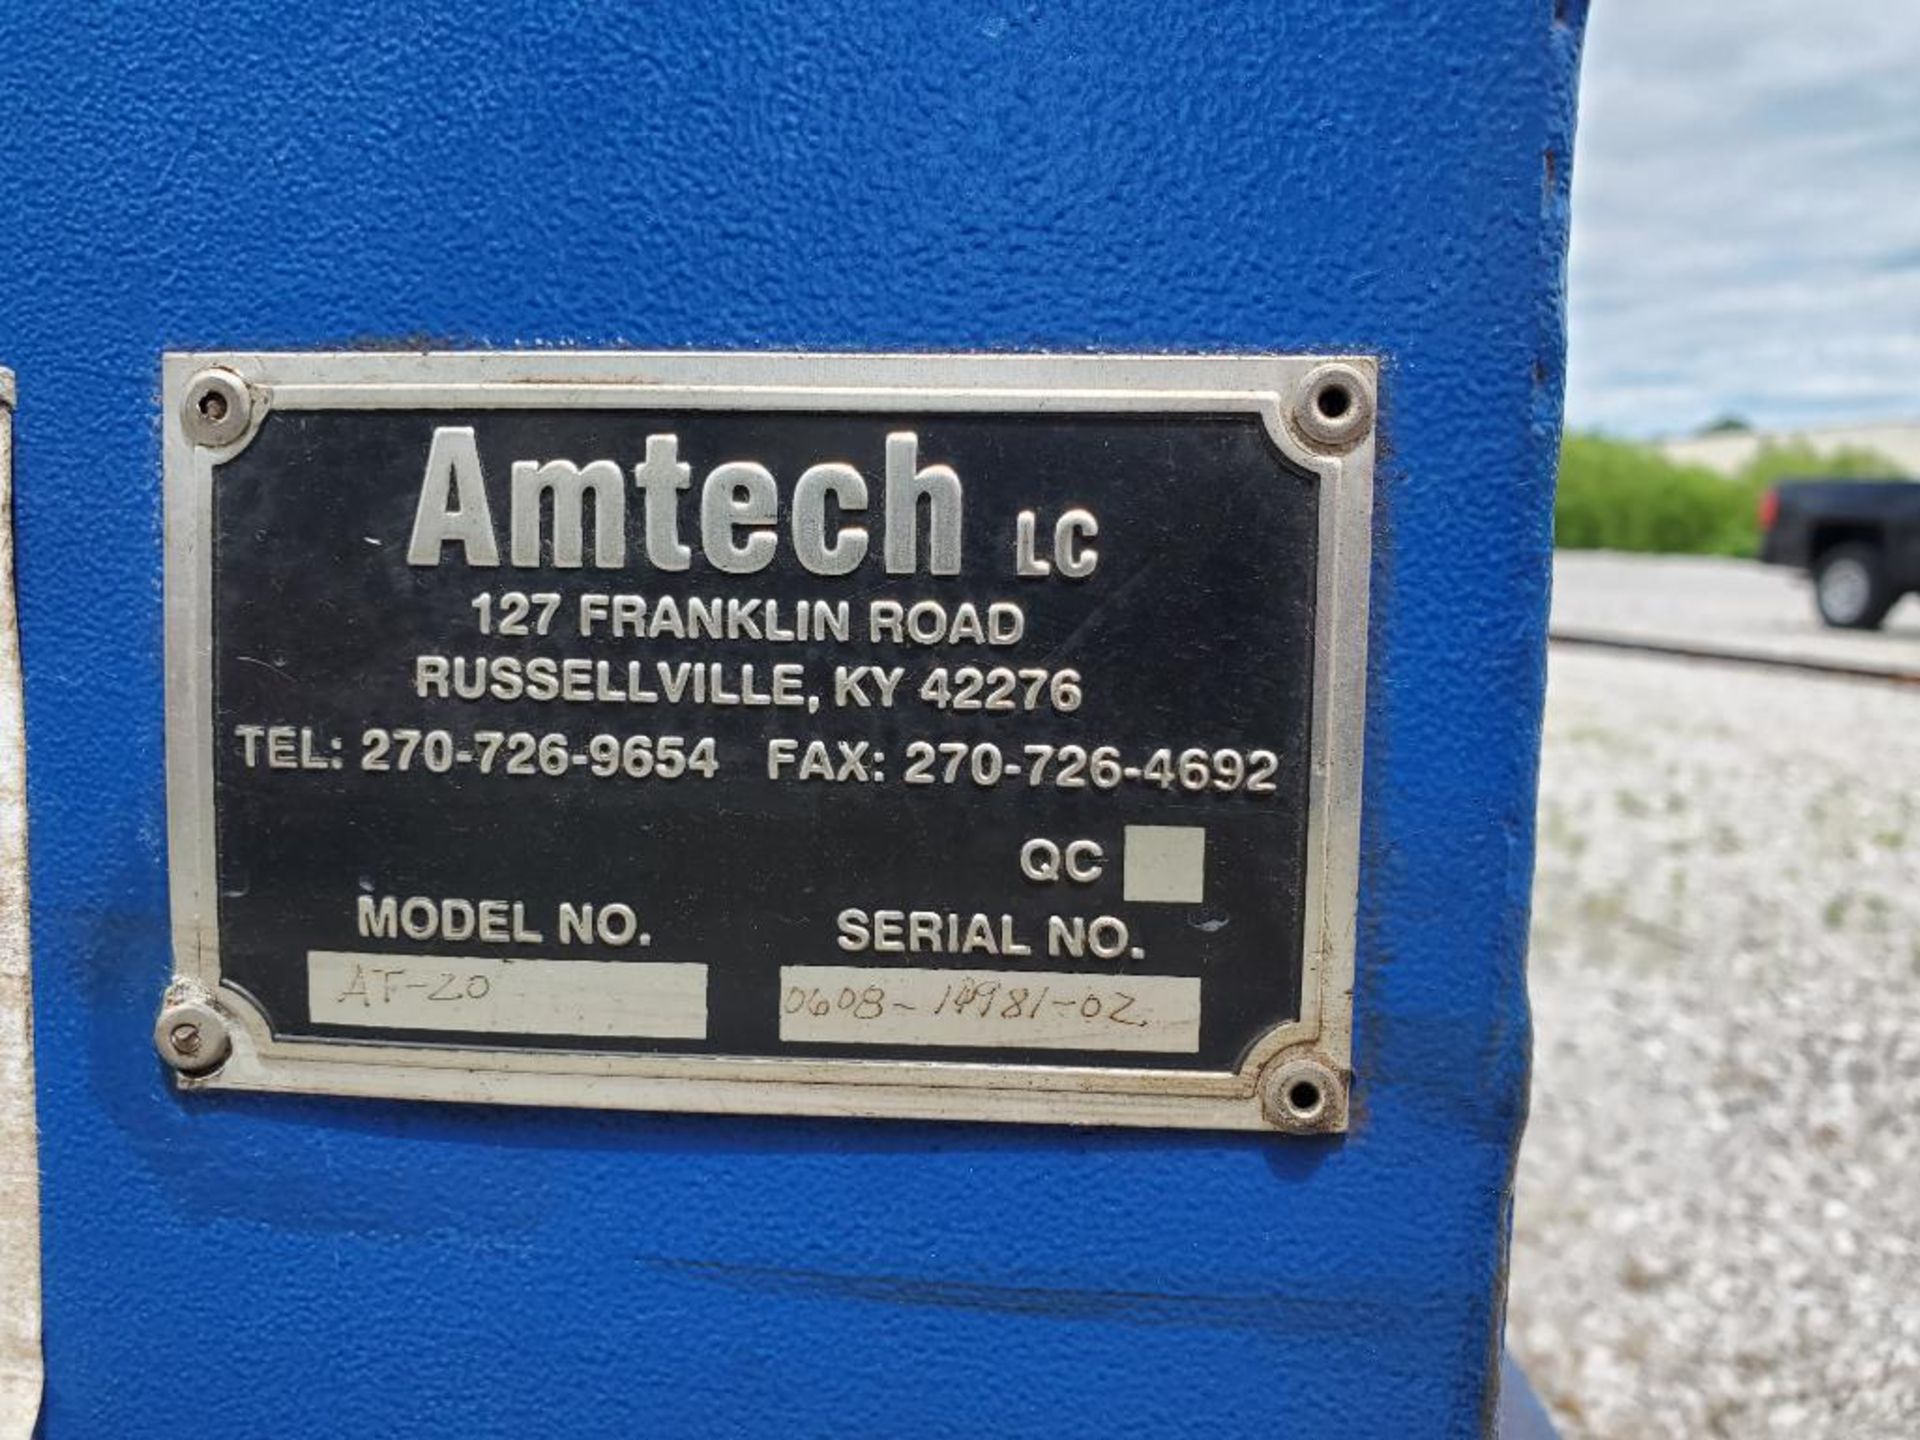 Amtech AT-20 Dust Collector, Belimo Variable Speed Control, S/N 0608-10981-0Z, 50 HP - Image 11 of 13